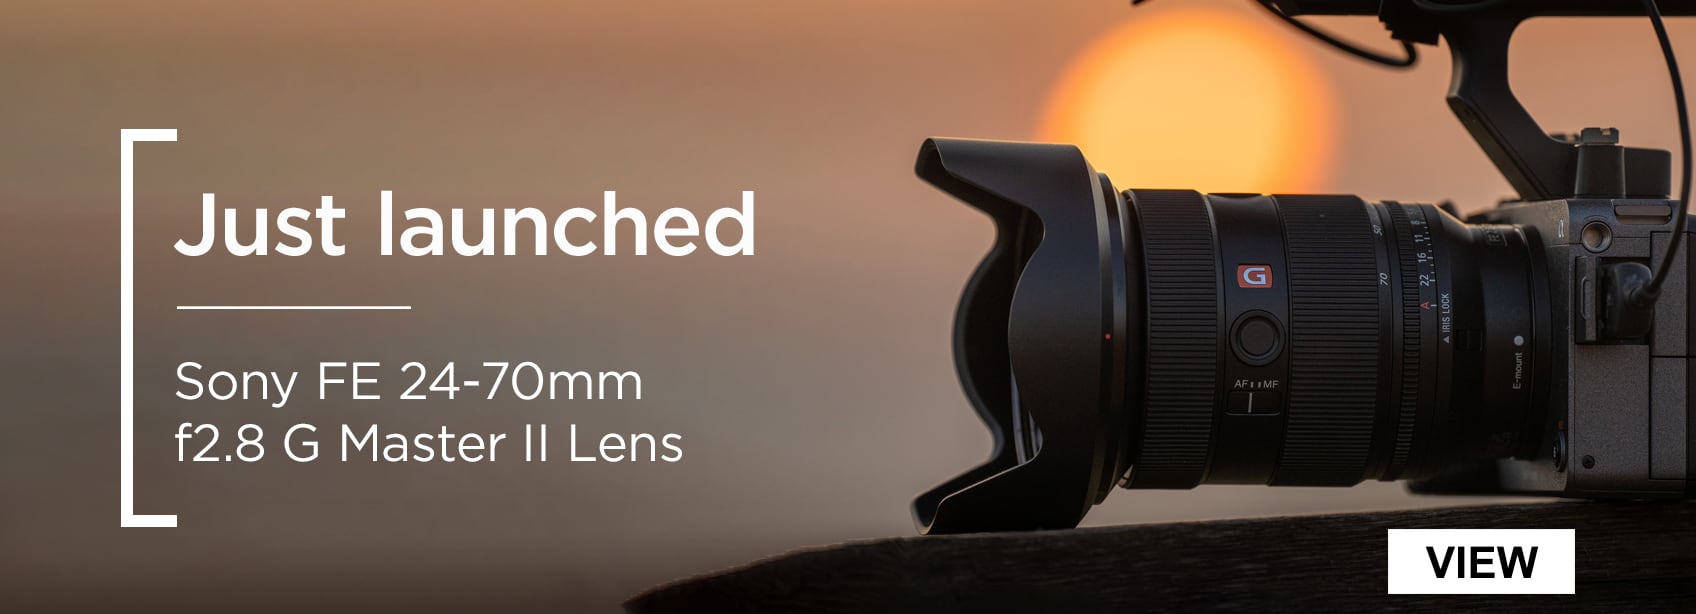 Just launched - Sony FE 24-70mm f2.8 G Master II Lens